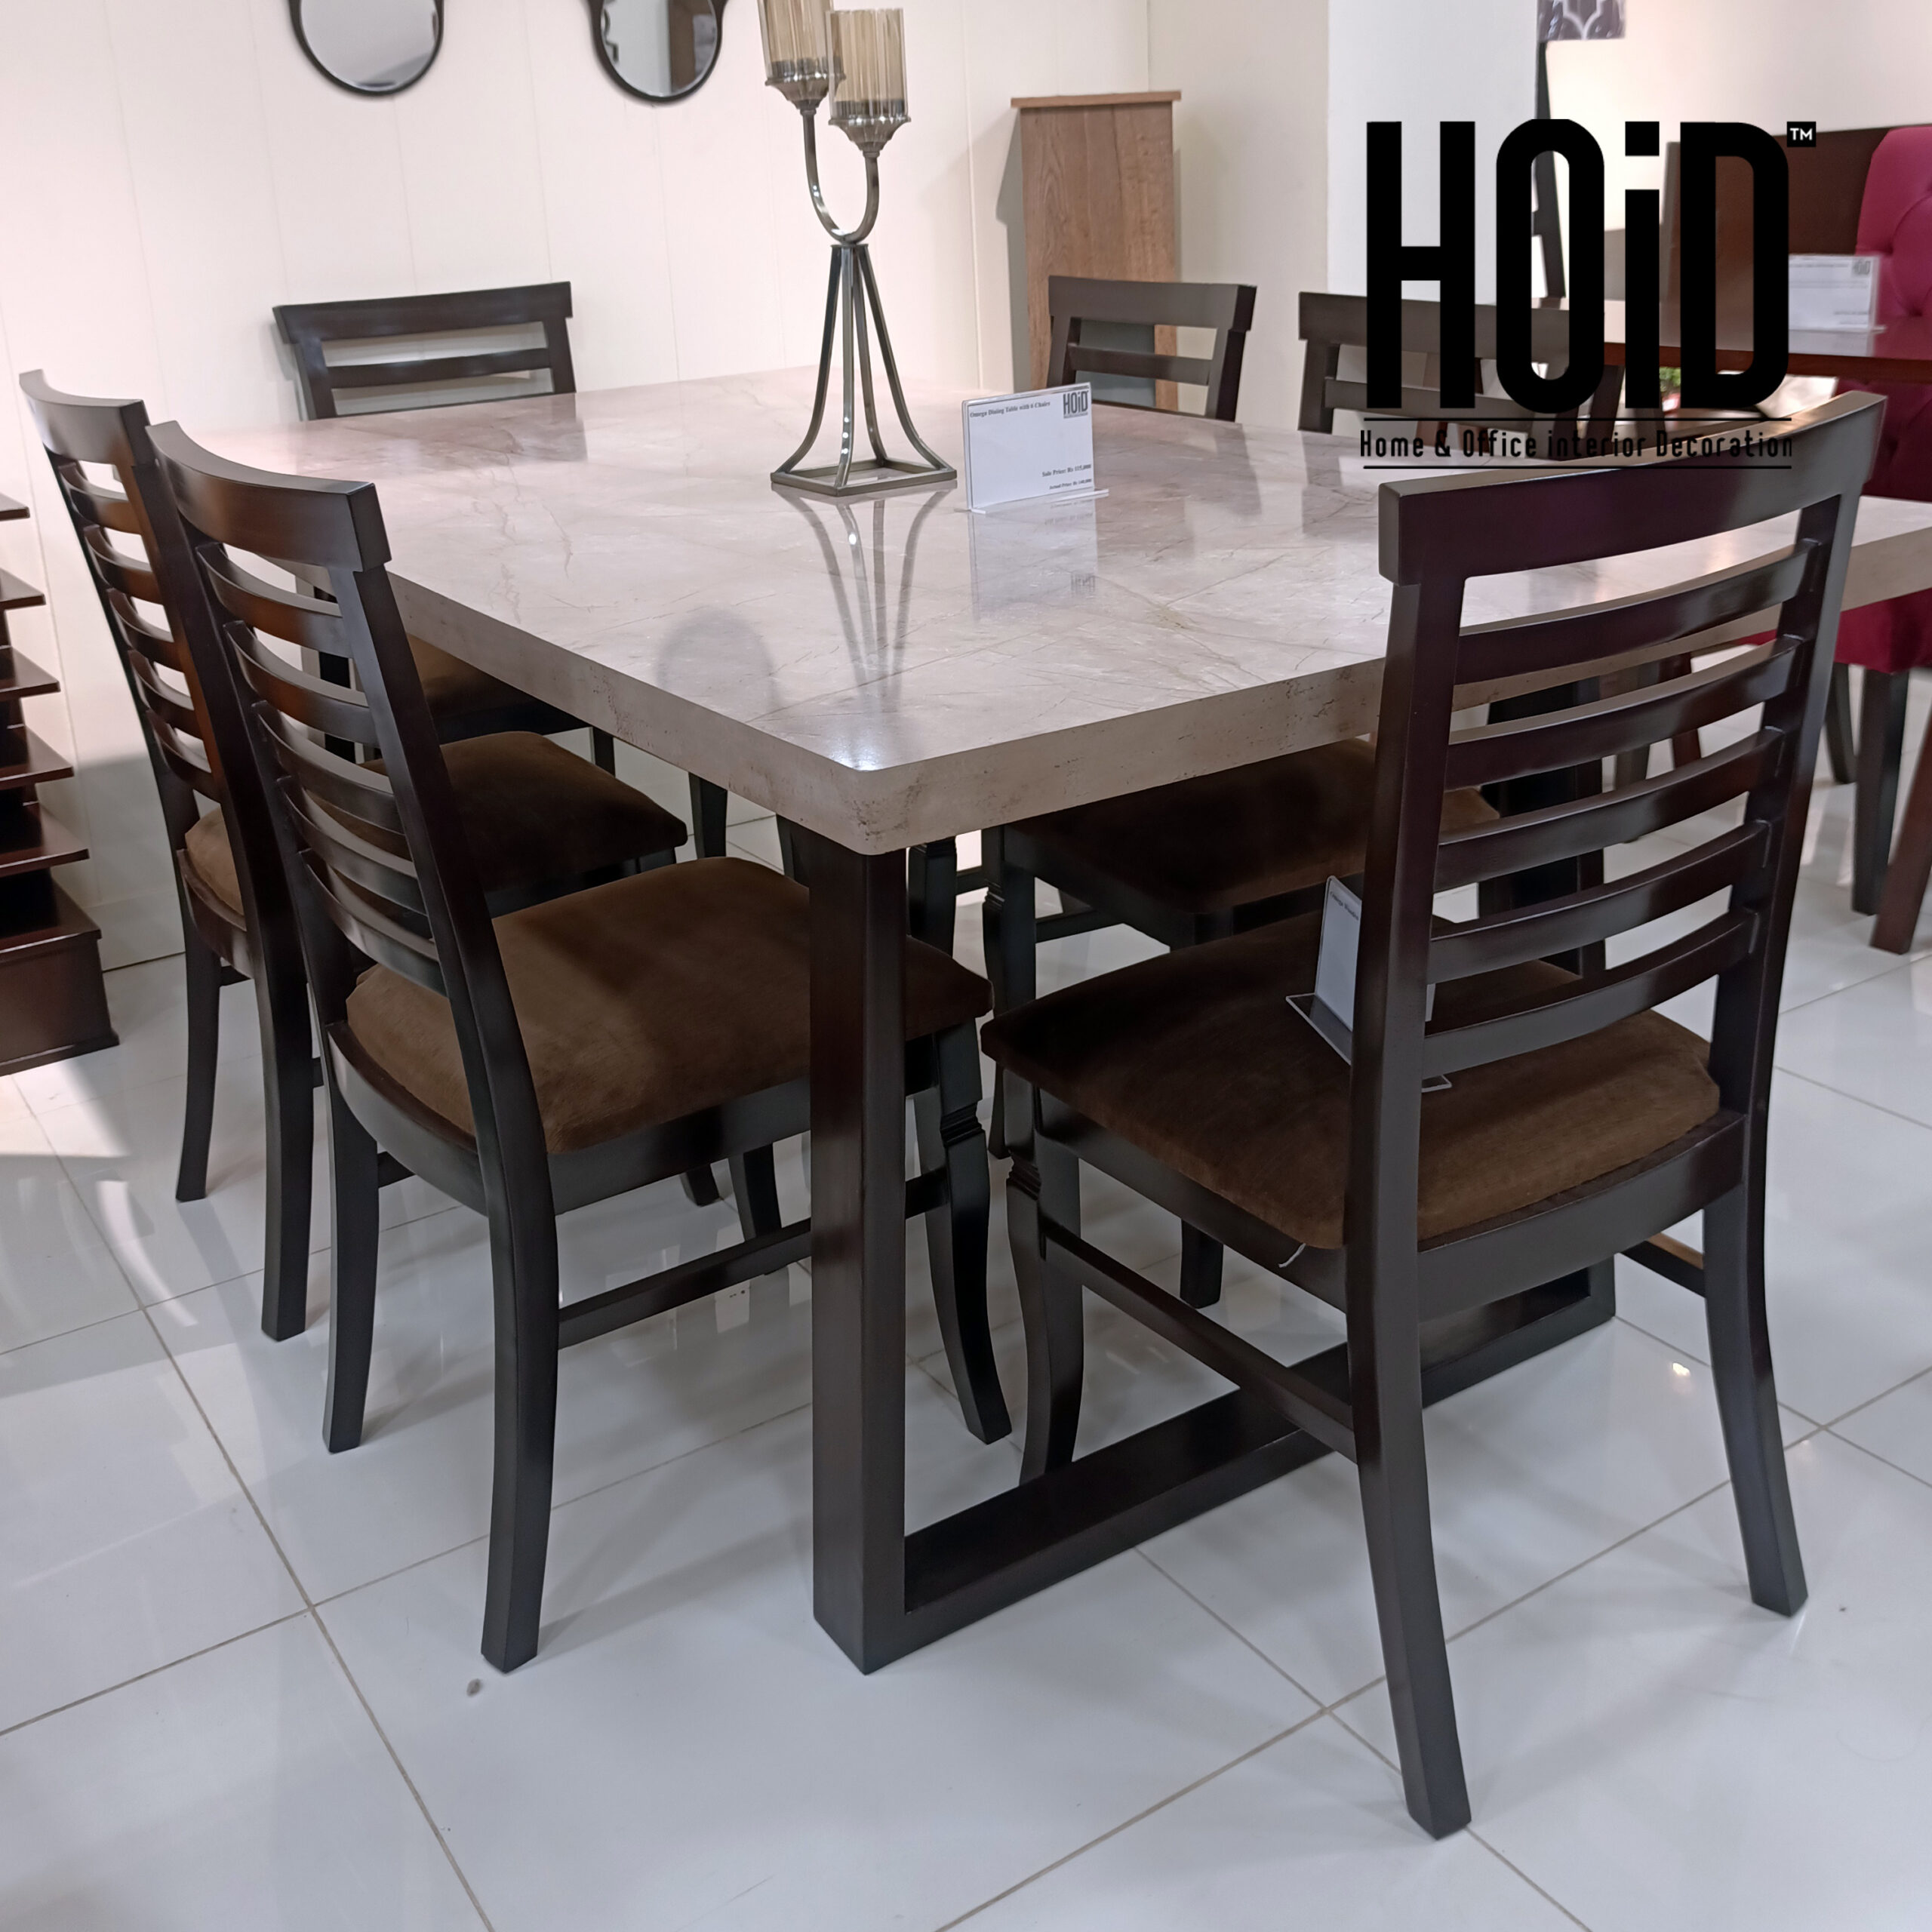 omega-dining-table-with-6-chairs-scaled-2.jpg